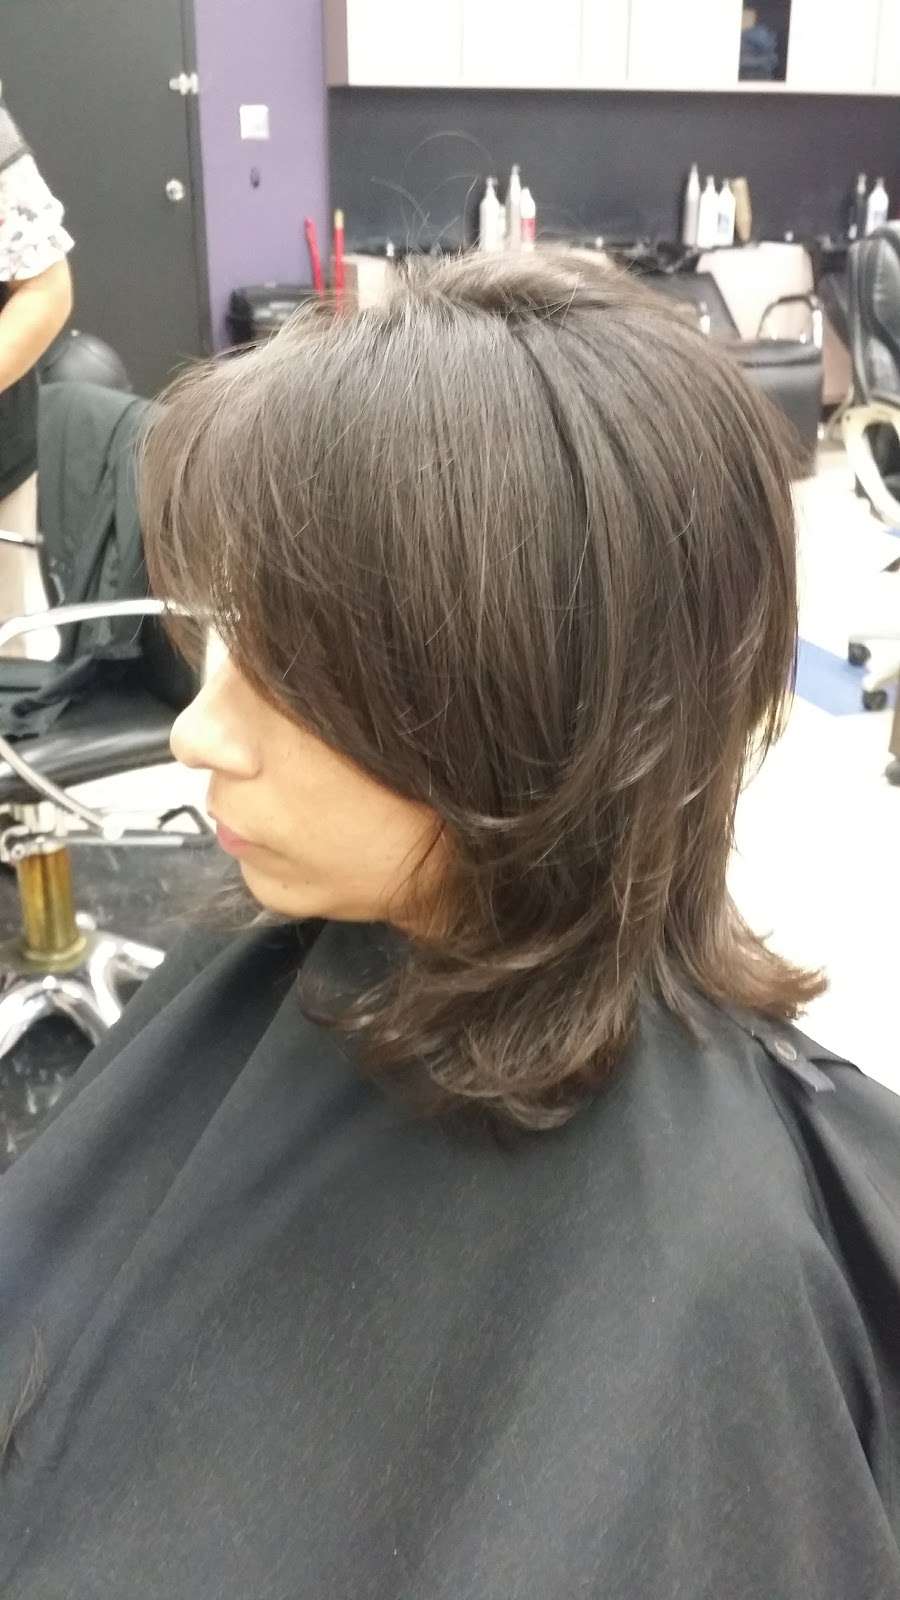 HairCuts And Styles | 12345 Mountain Ave C, Chino, CA 91710 | Phone: (909) 591-1988